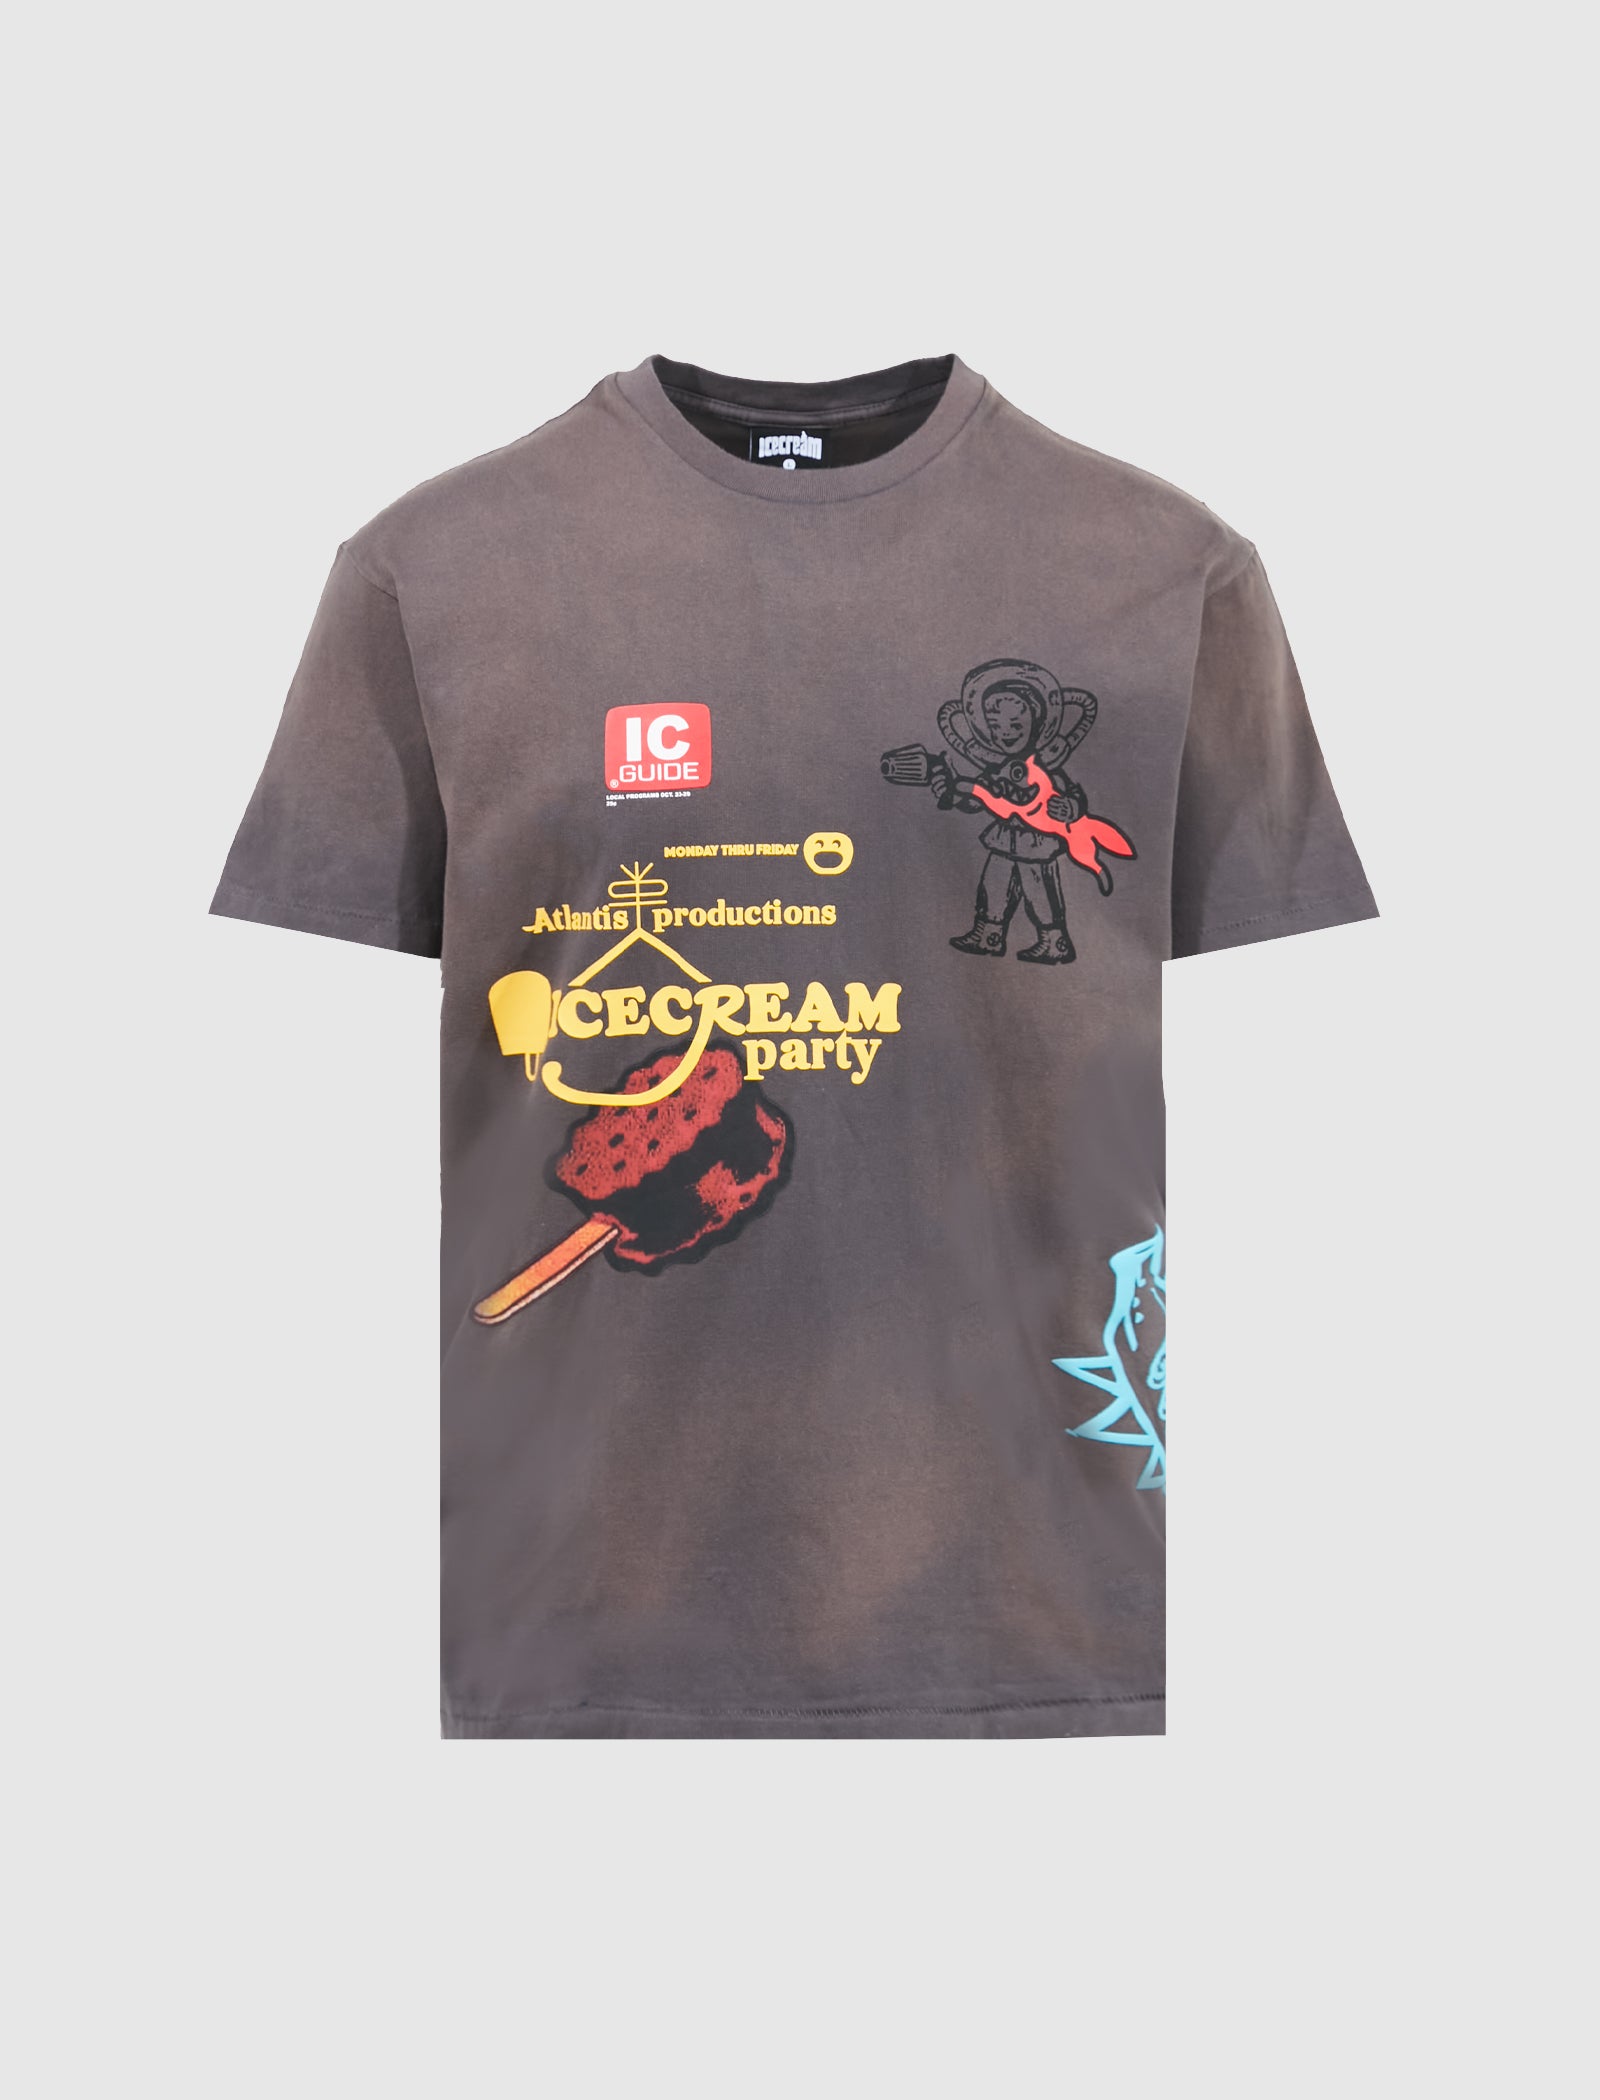 ICECREAM CHECK IN FOR 4 LAUGHS TEE